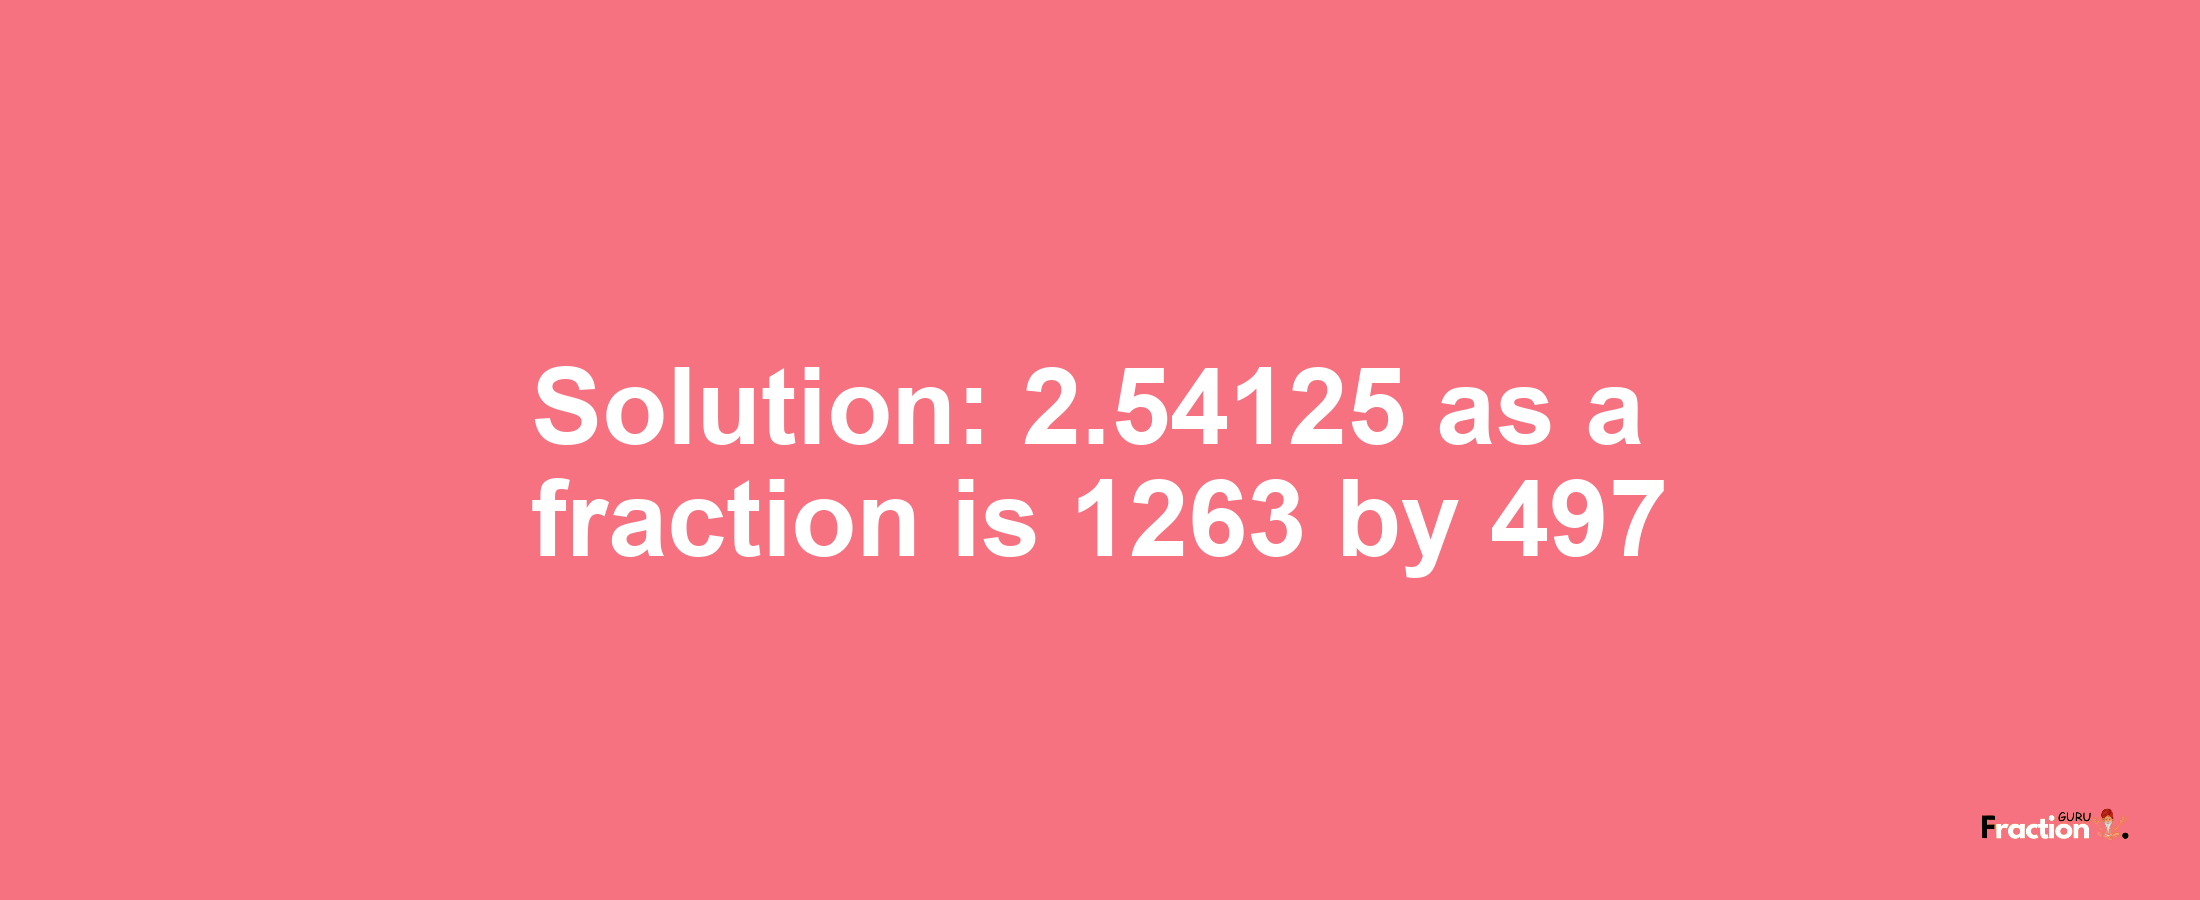 Solution:2.54125 as a fraction is 1263/497